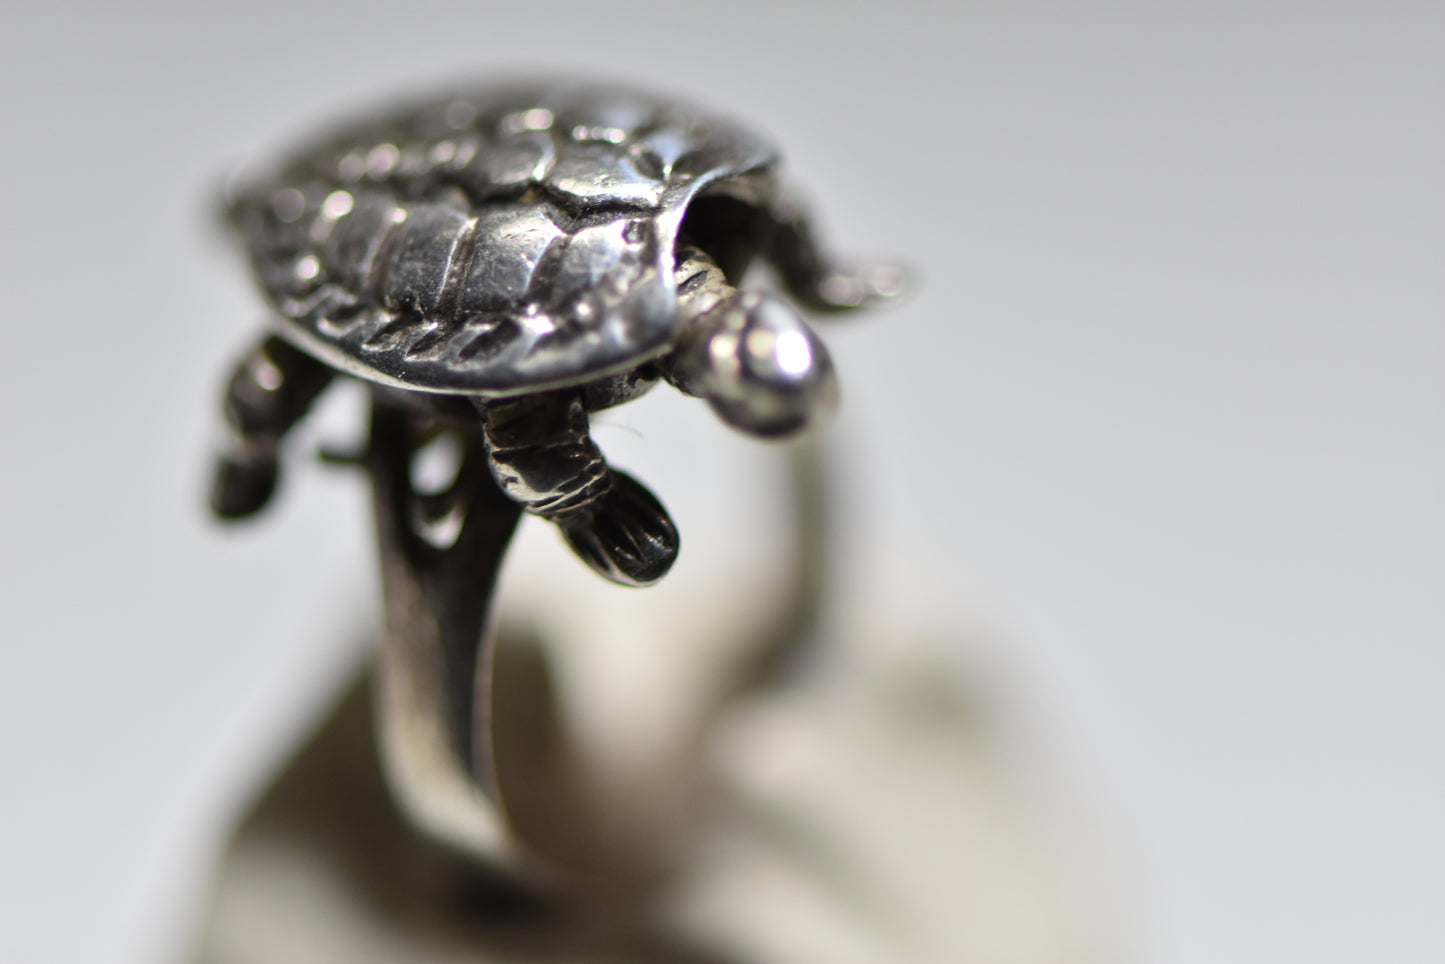 Turtle ring moving tortoise pinky women girls sterling silver